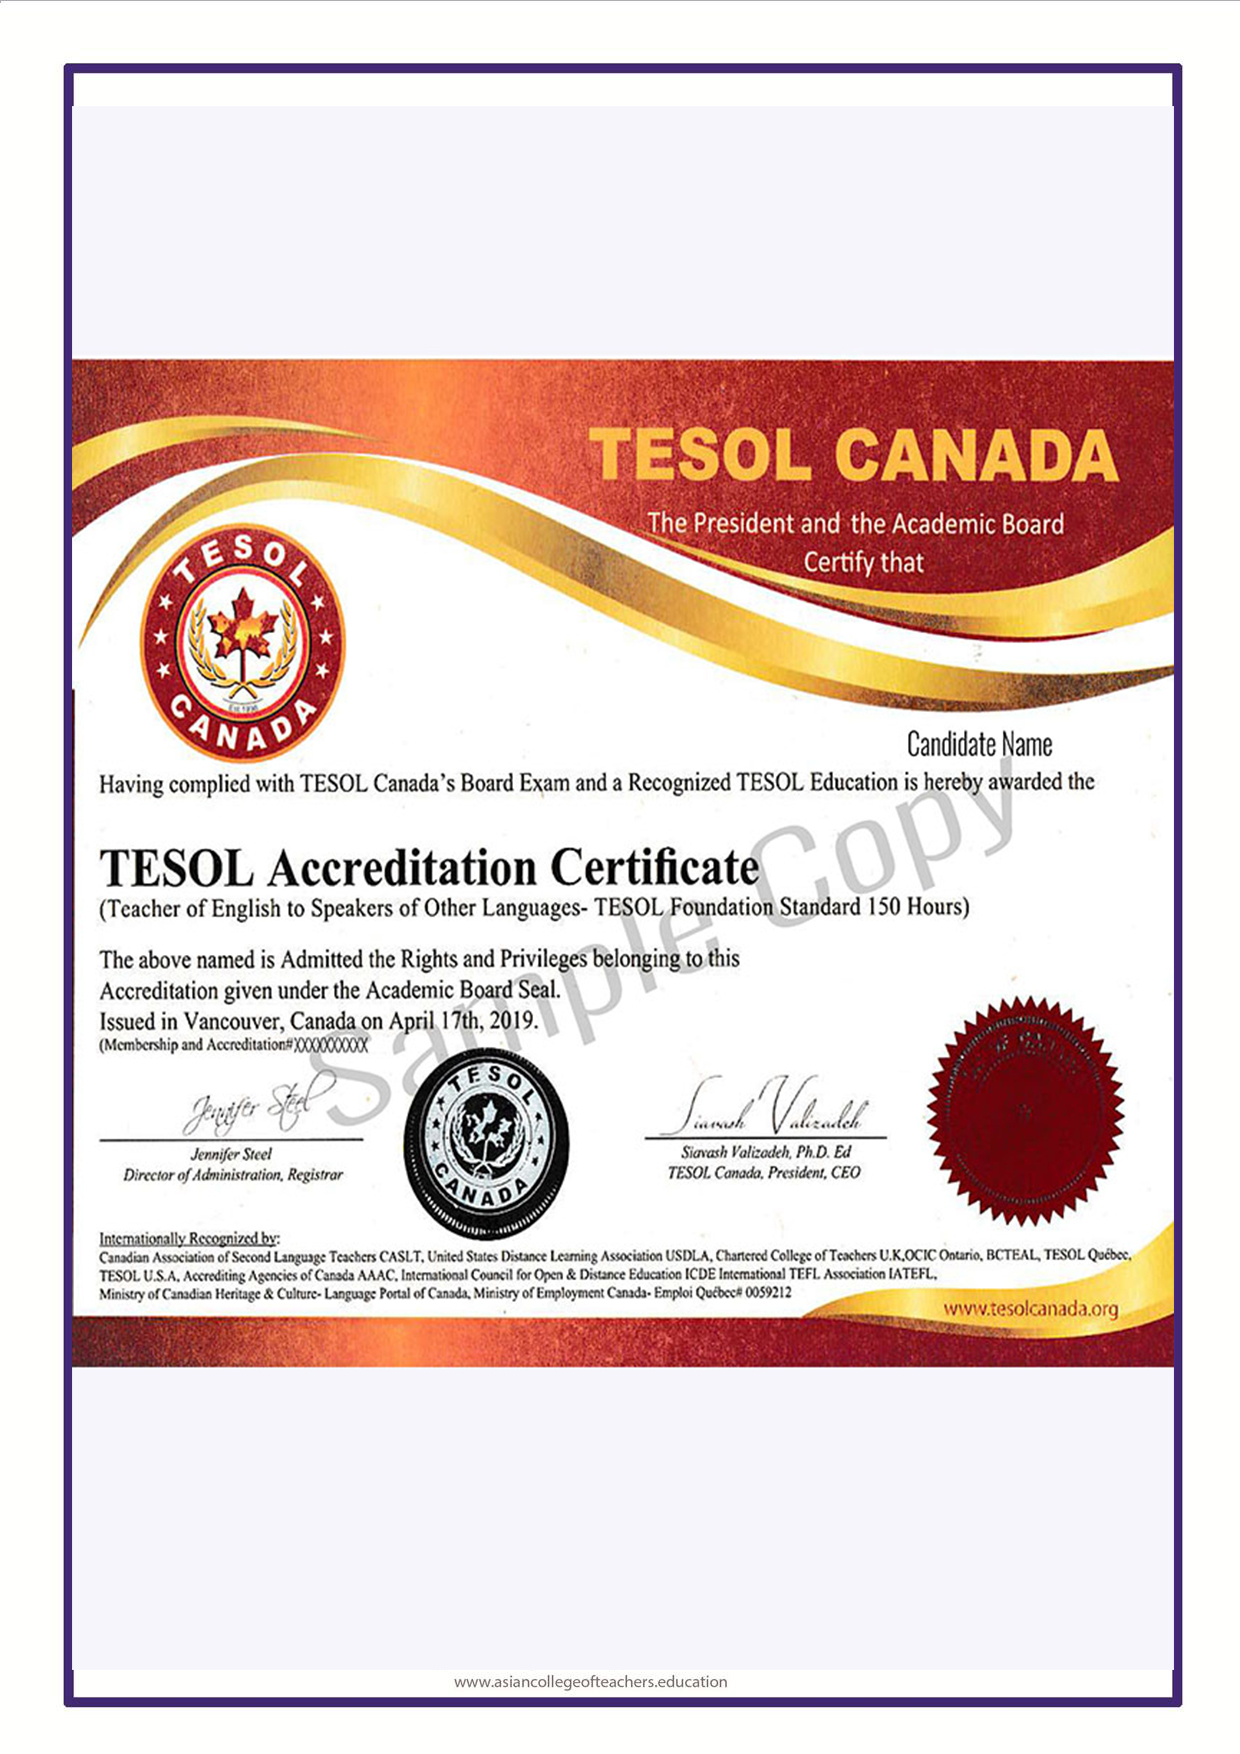 TESOL Canada Accreditation – Asian College of Teachers (ACT)